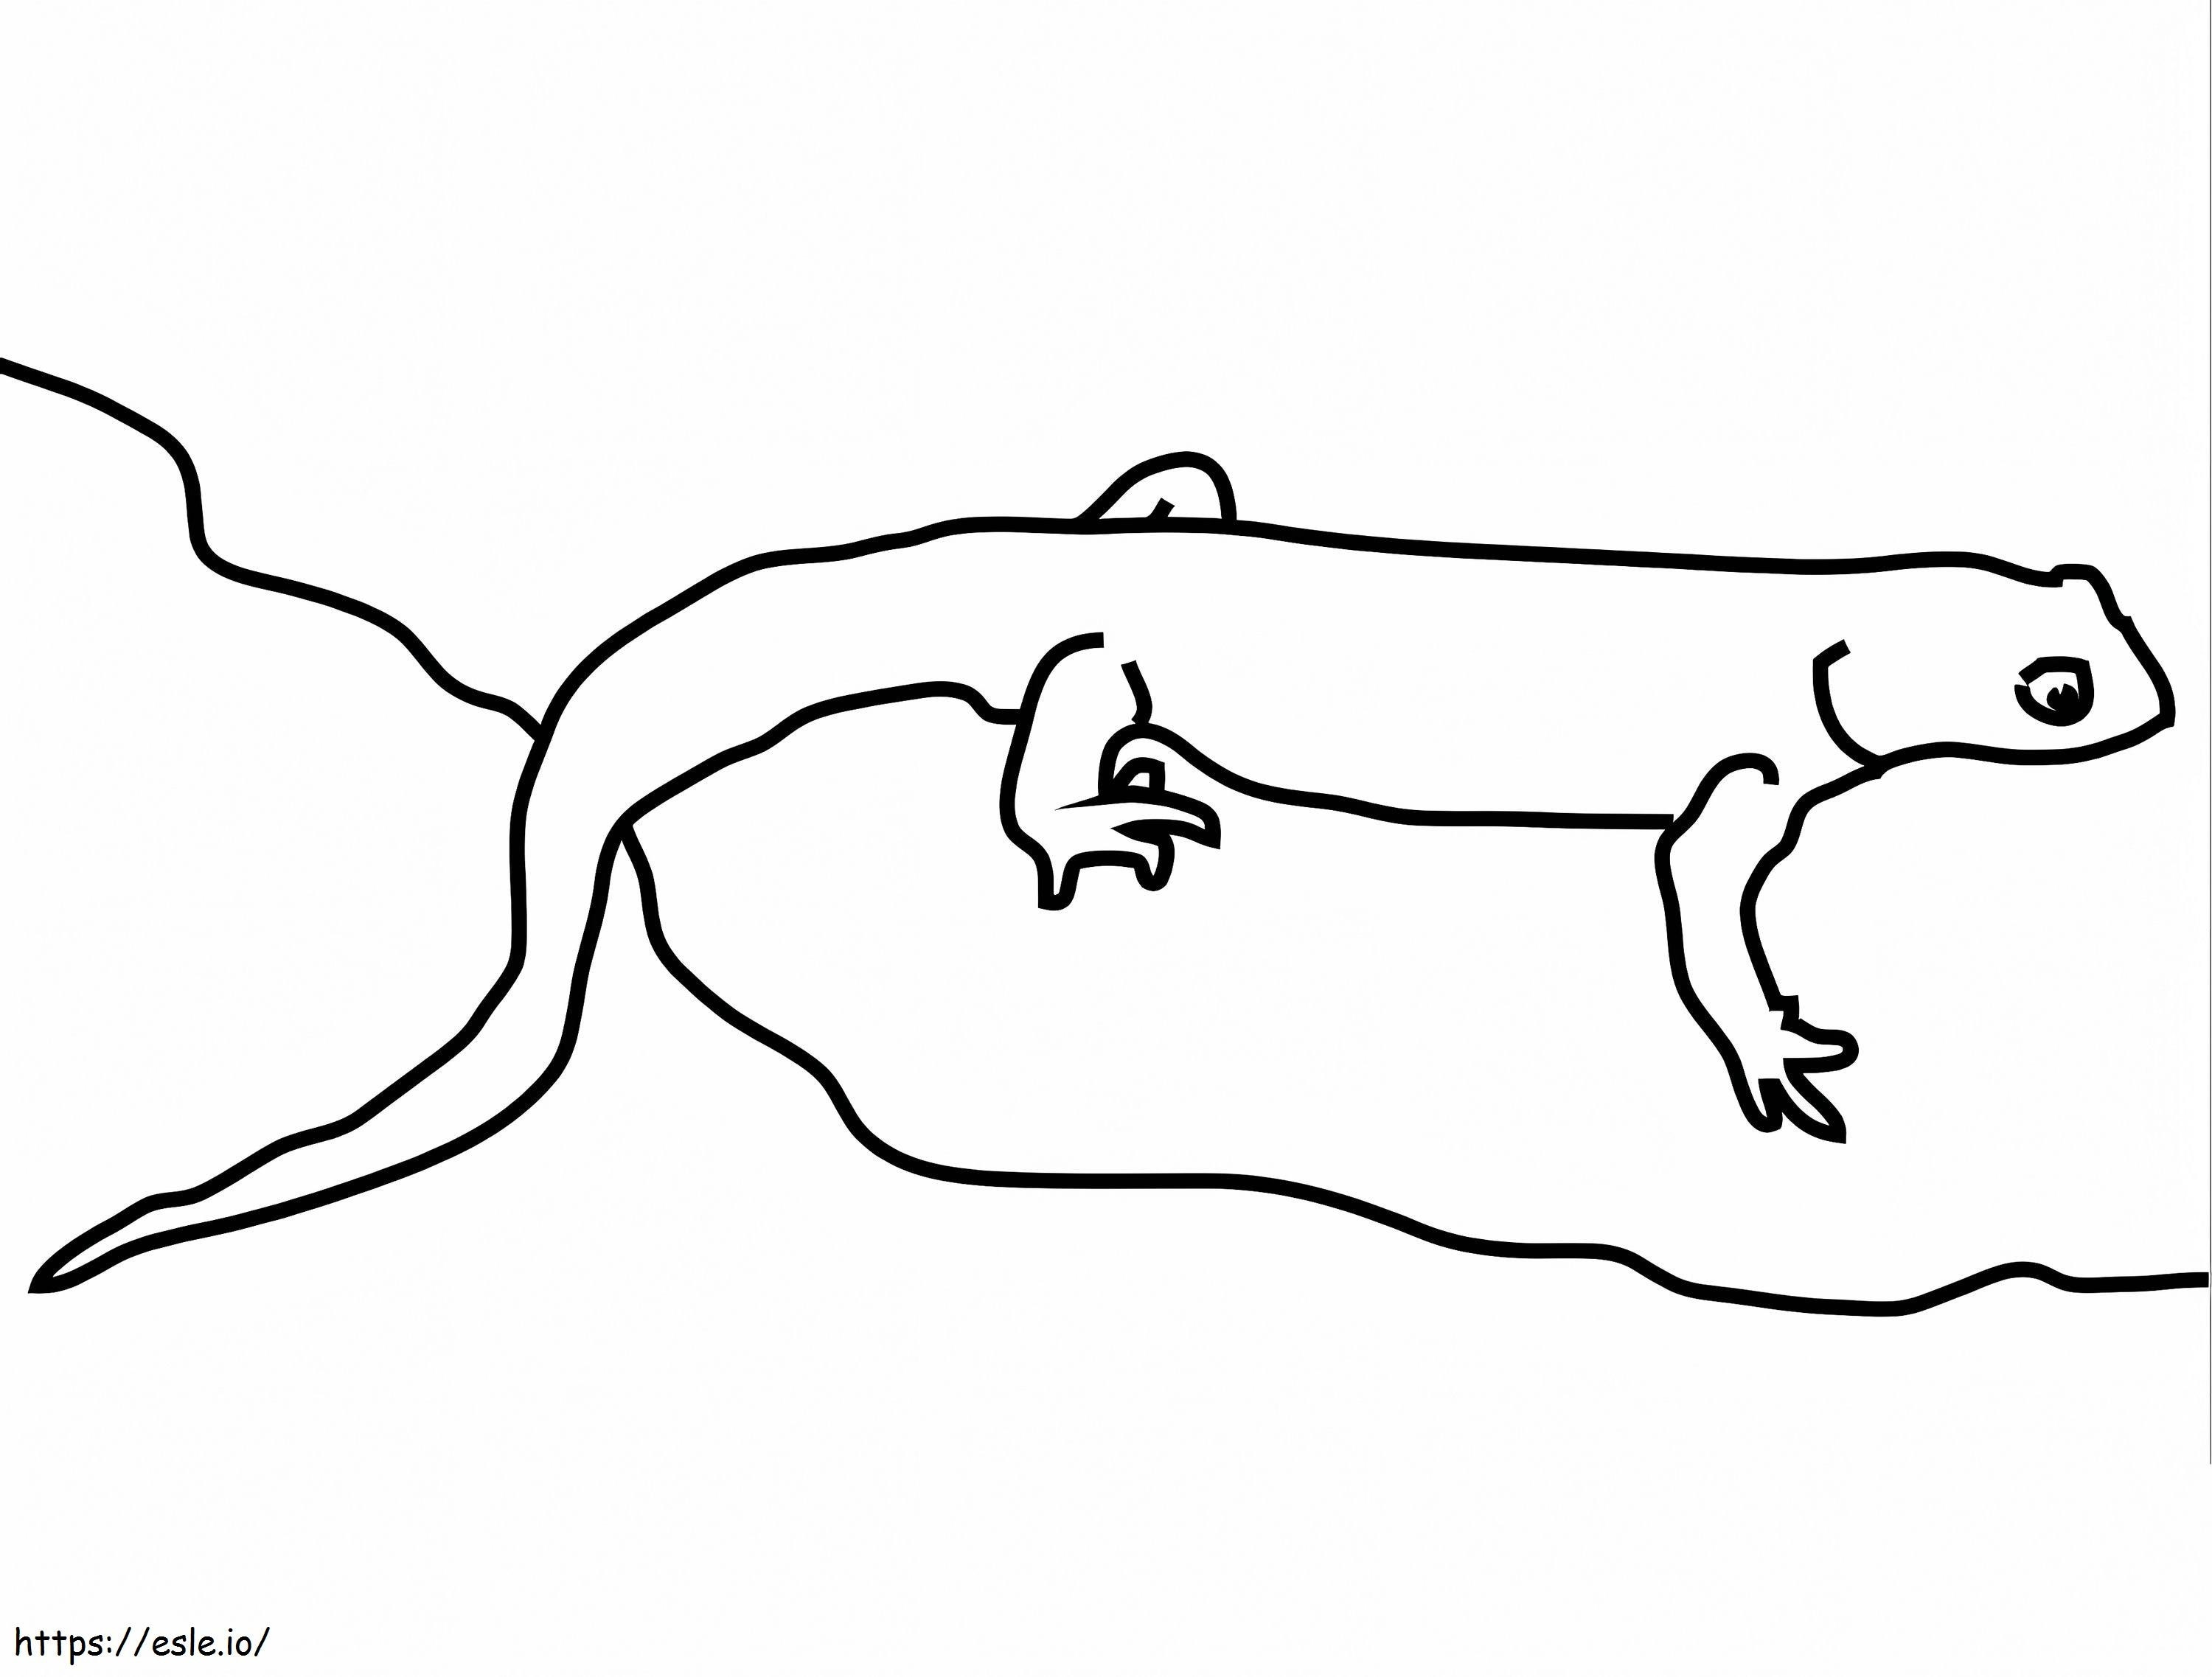 California Newt coloring page